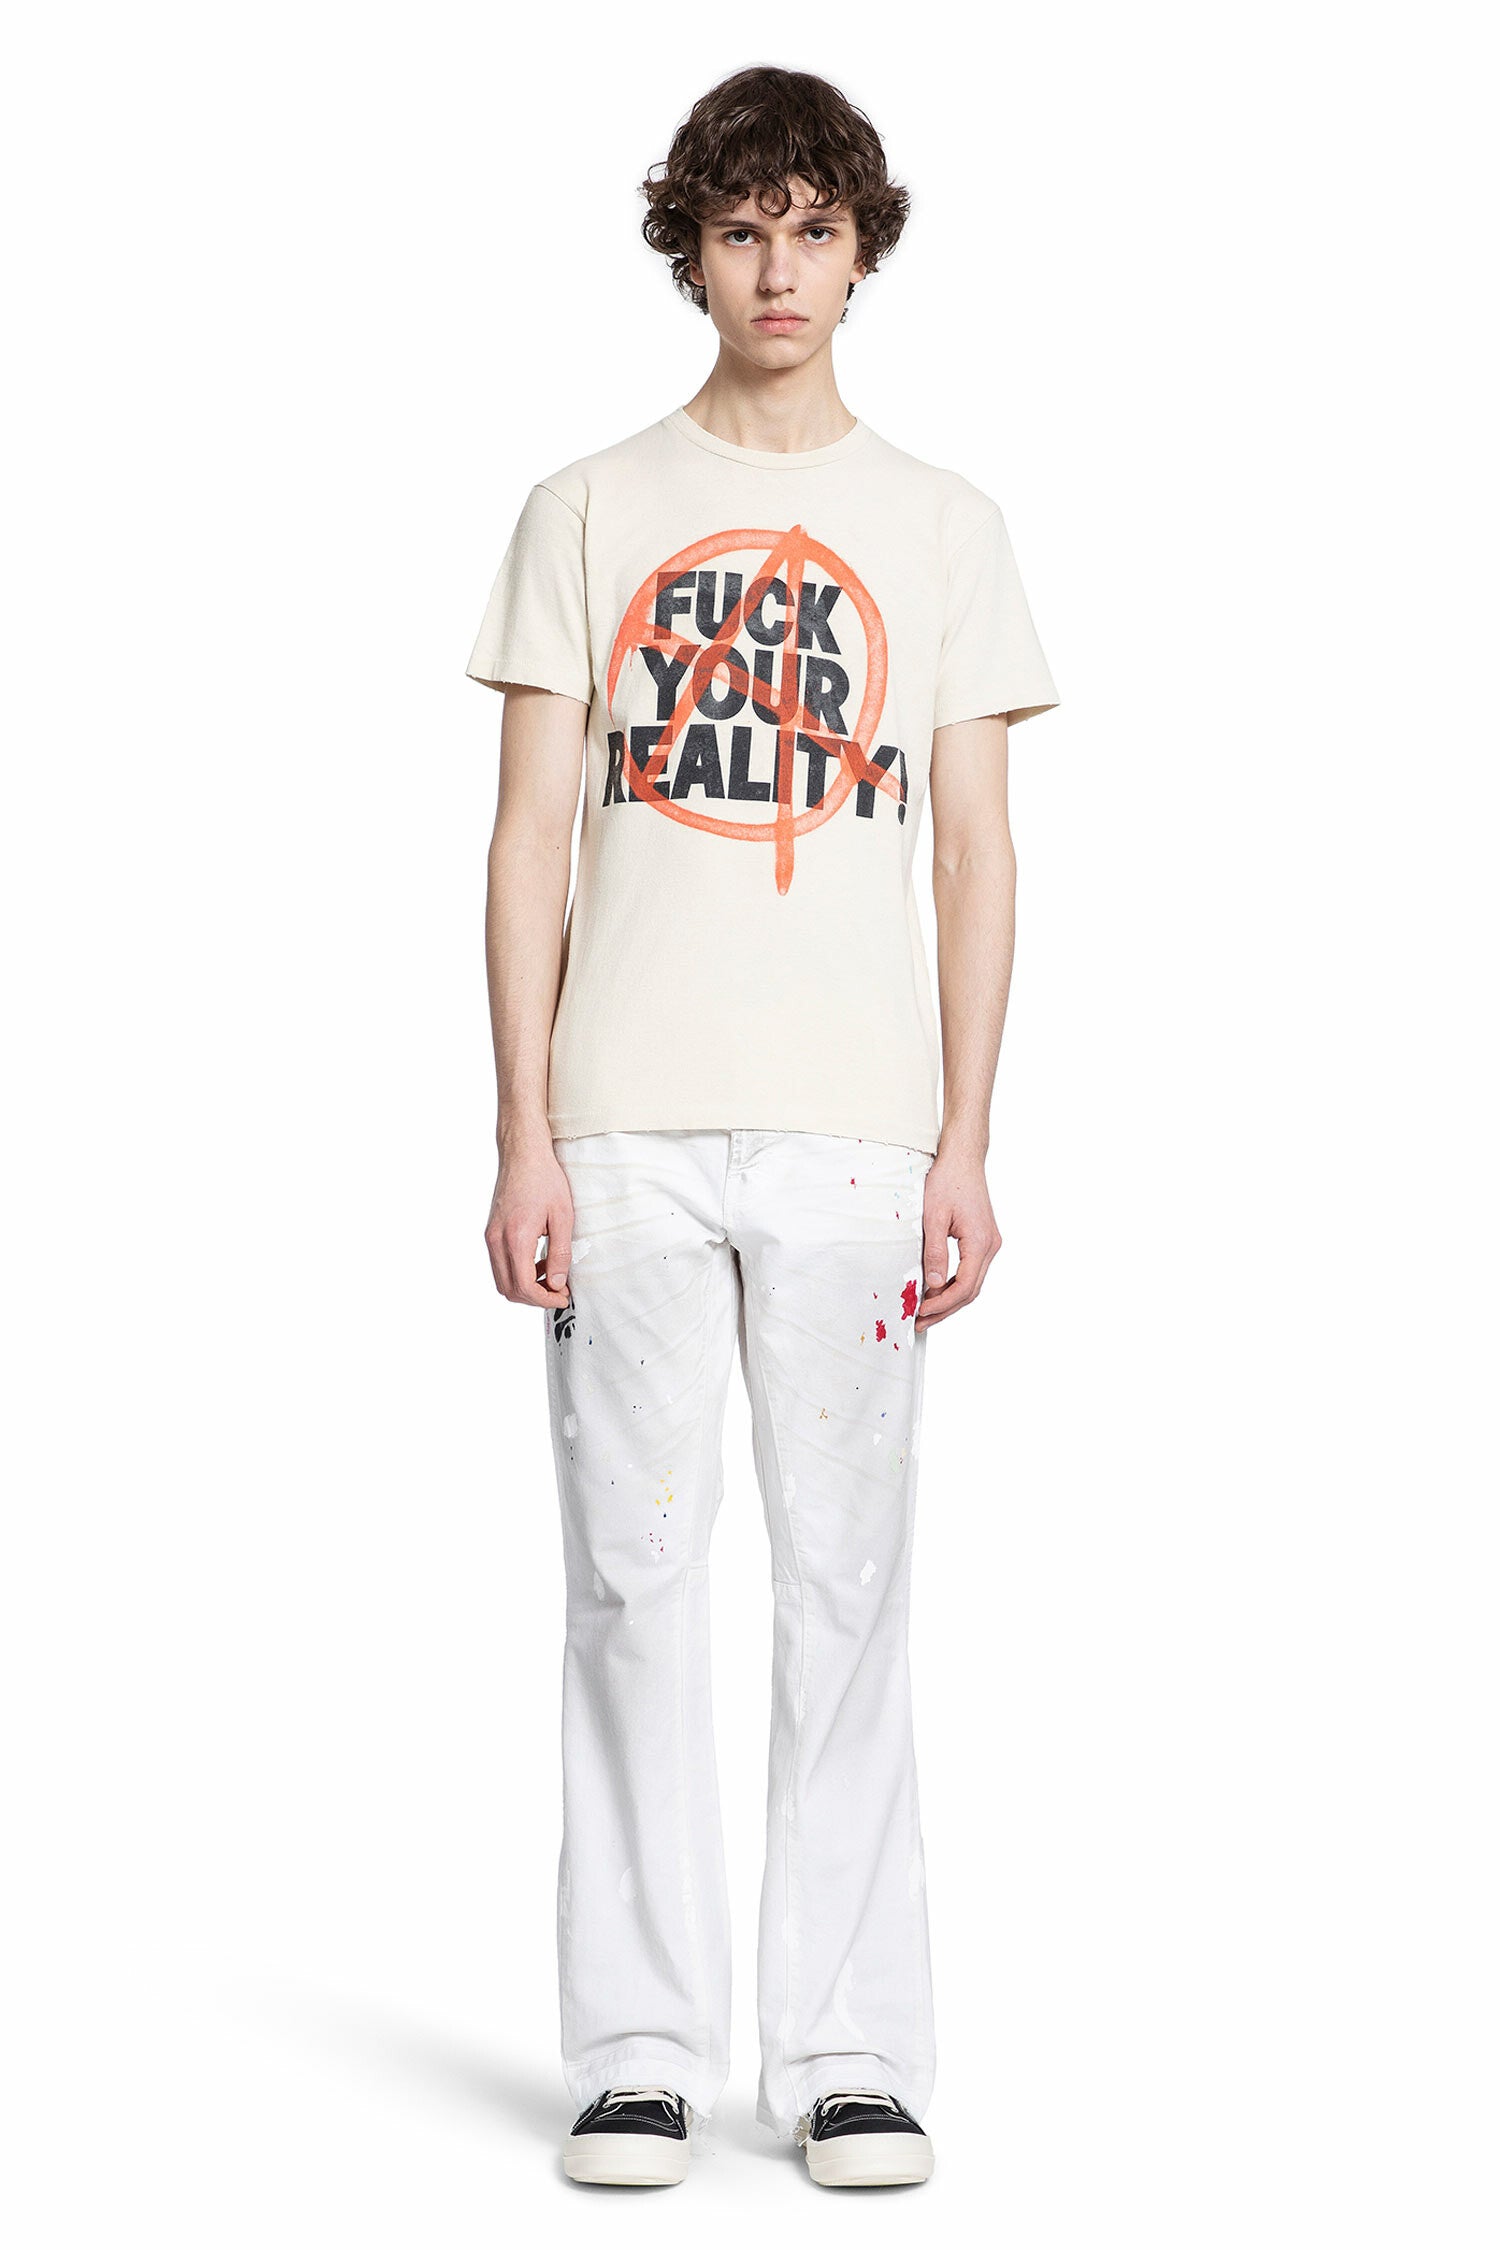 GALLERY DEPT. MAN OFF-WHITE T-SHIRTS - GALLERY DEPT. - T-SHIRTS 